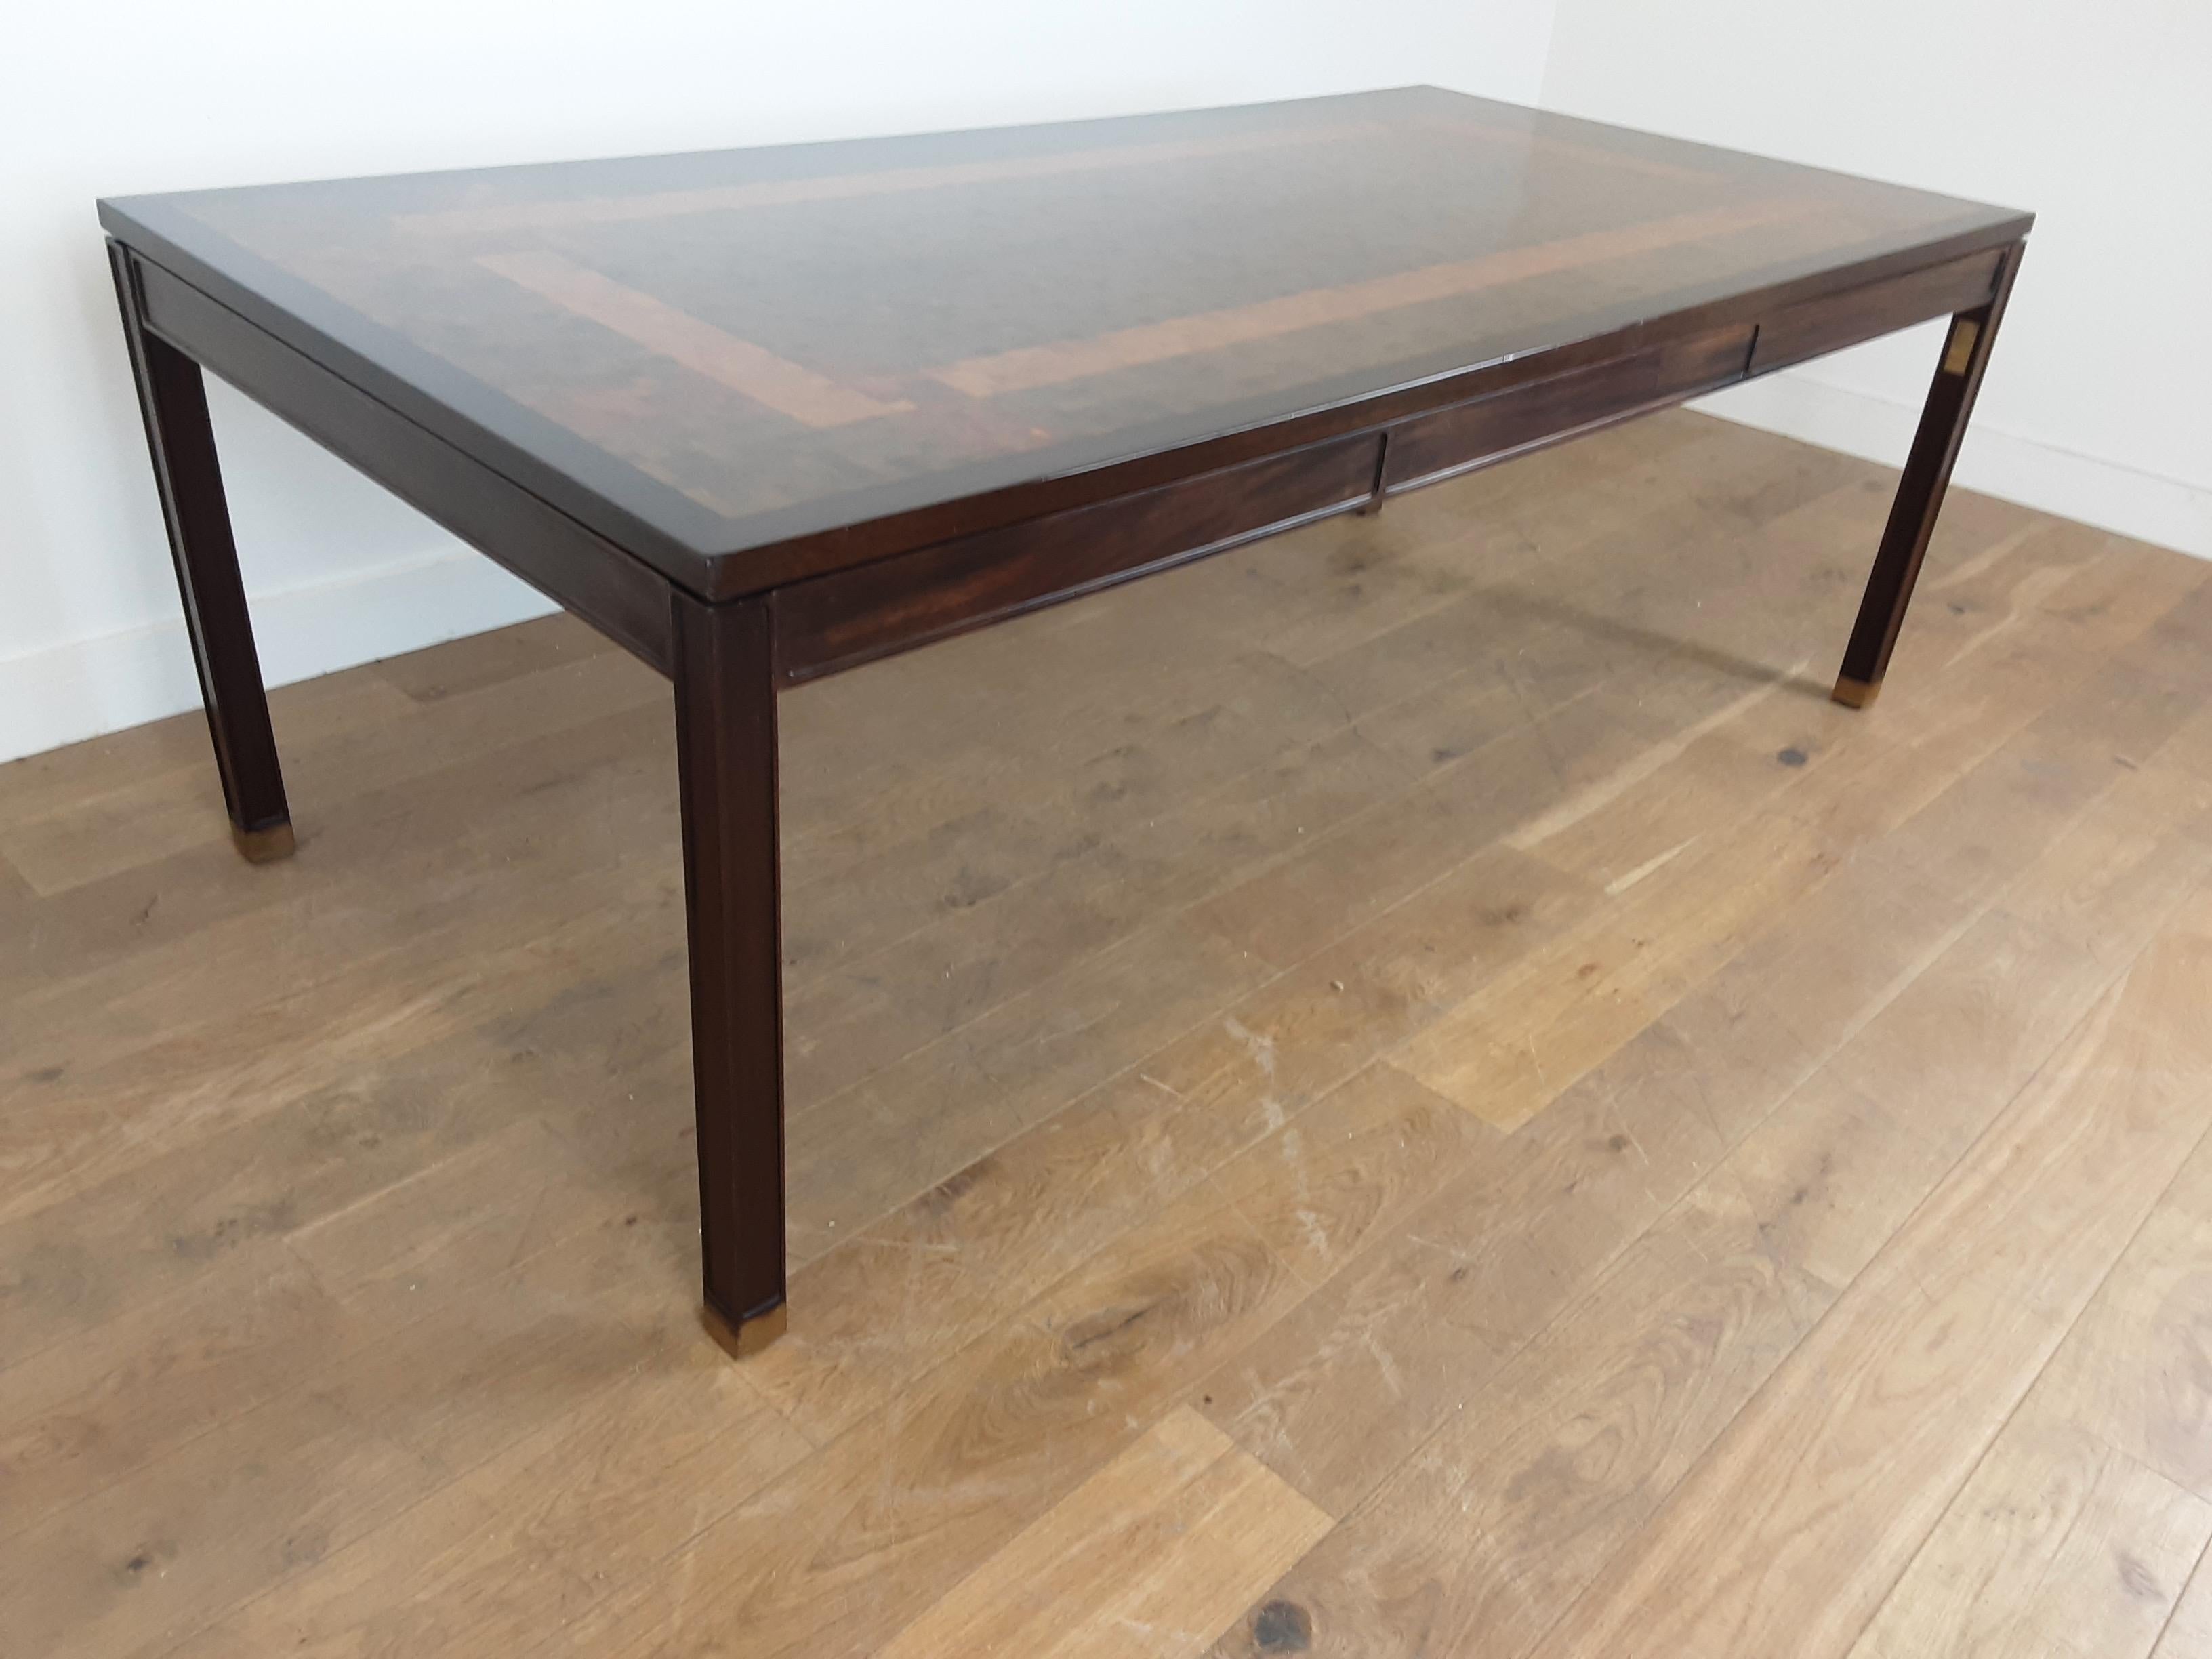 Large Midcentury Dining Table Designed by Gorm Lindum with Mosaic Design For Sale 2